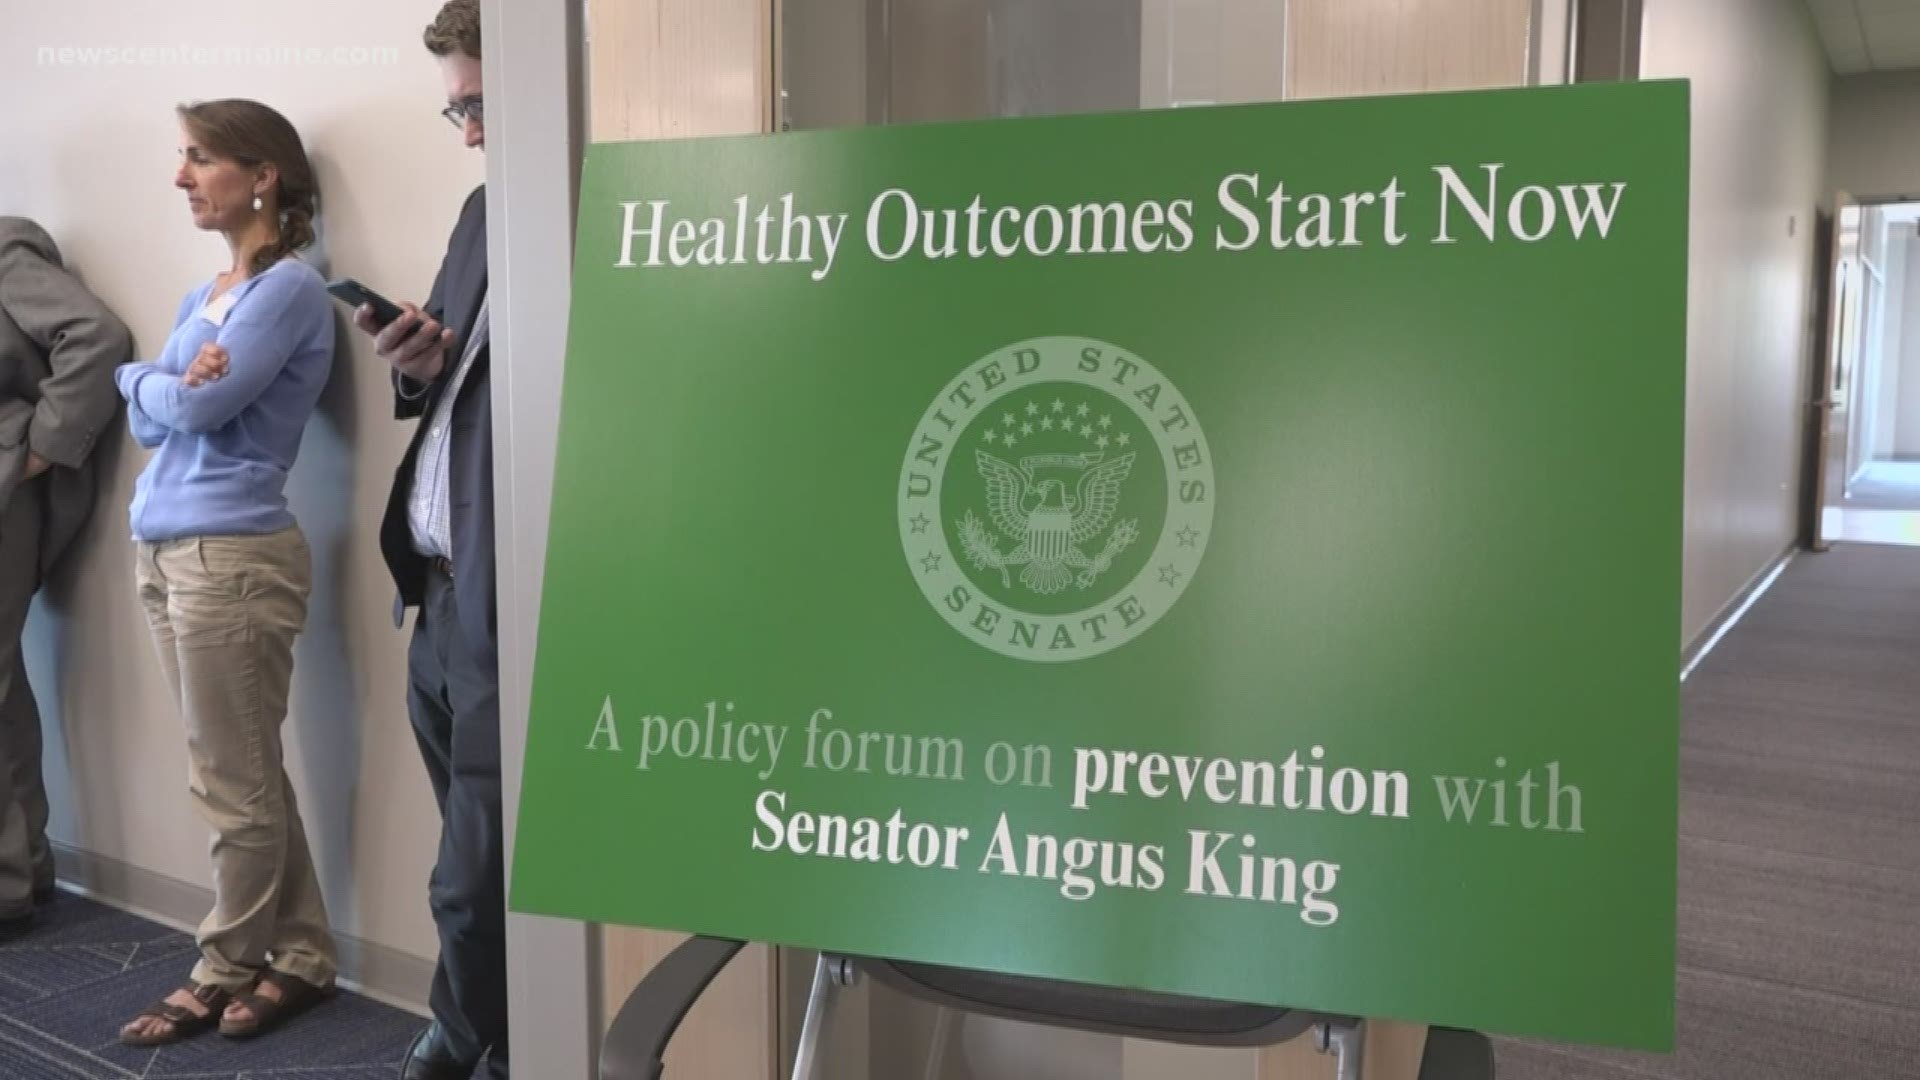 Senator Angus King says he wants to change that.
Today he hosted a panel with healthcare professionals from around Maine and across the country.